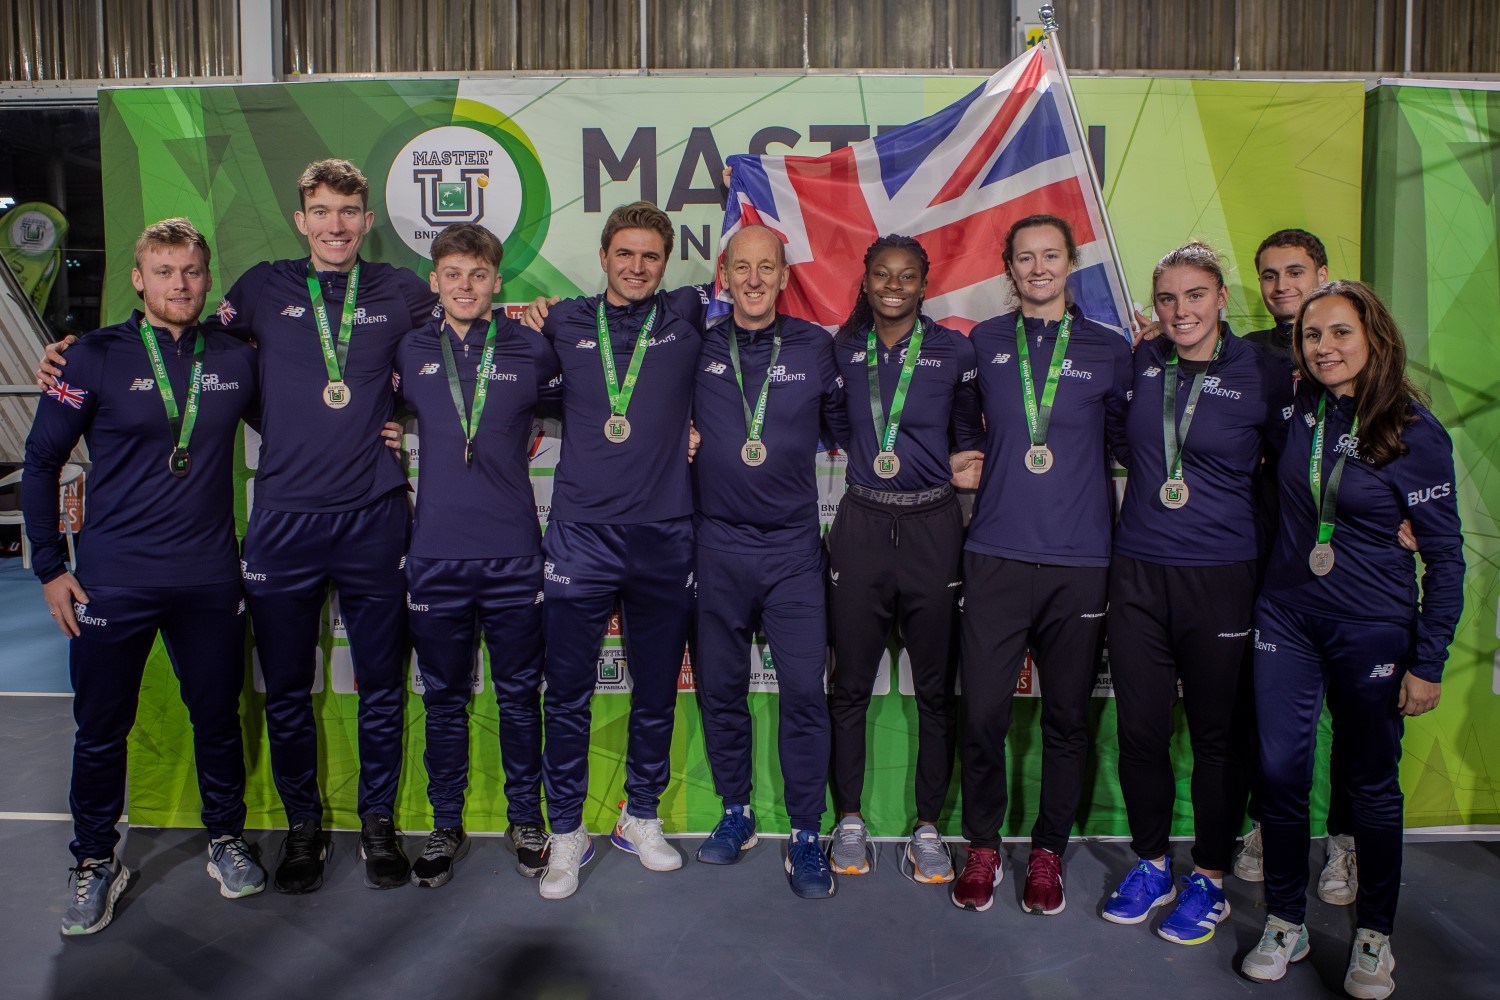 A group of people dressed in dark blue tracksuits stood arm-in-arm with medal around their necks. There is a British flag on the wall behind them